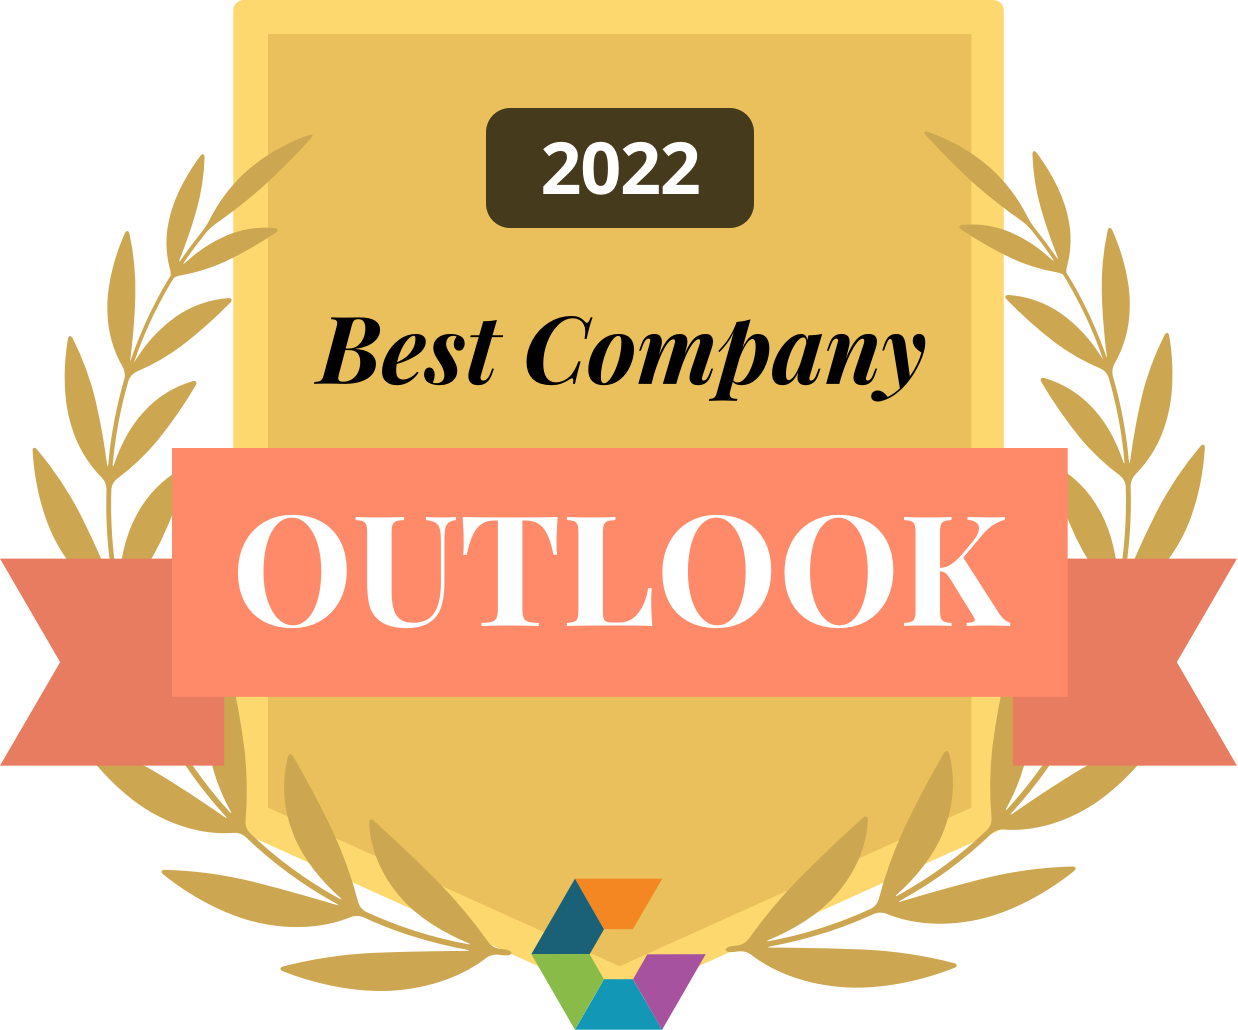 Comparably best company outlook 2022